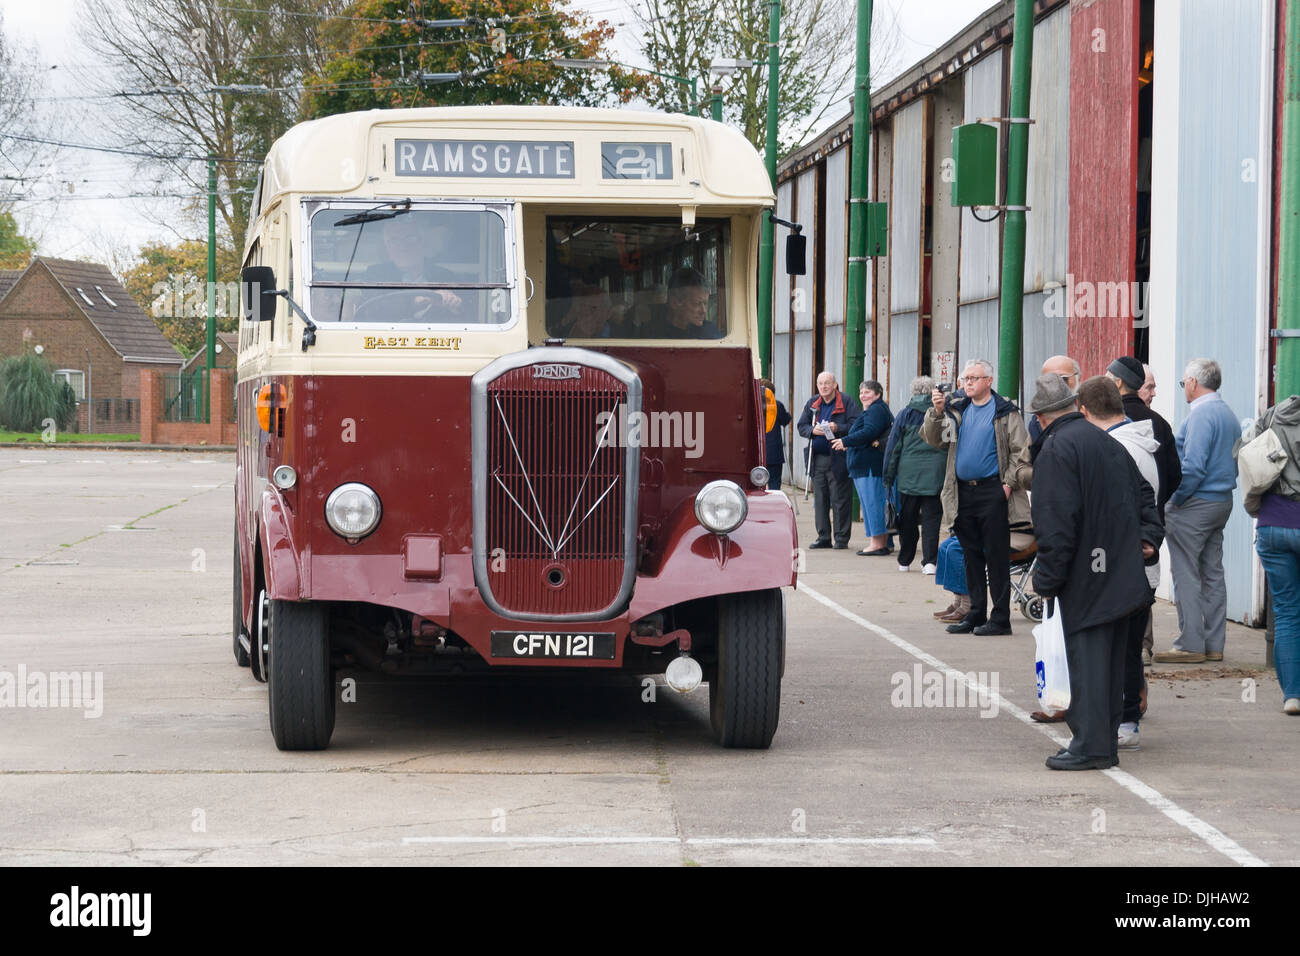 The Trolleybus Museum Belton Road Sandtoft Doncaster South Yorkshire DN8 5SX, England. Vintage bus Stock Photo